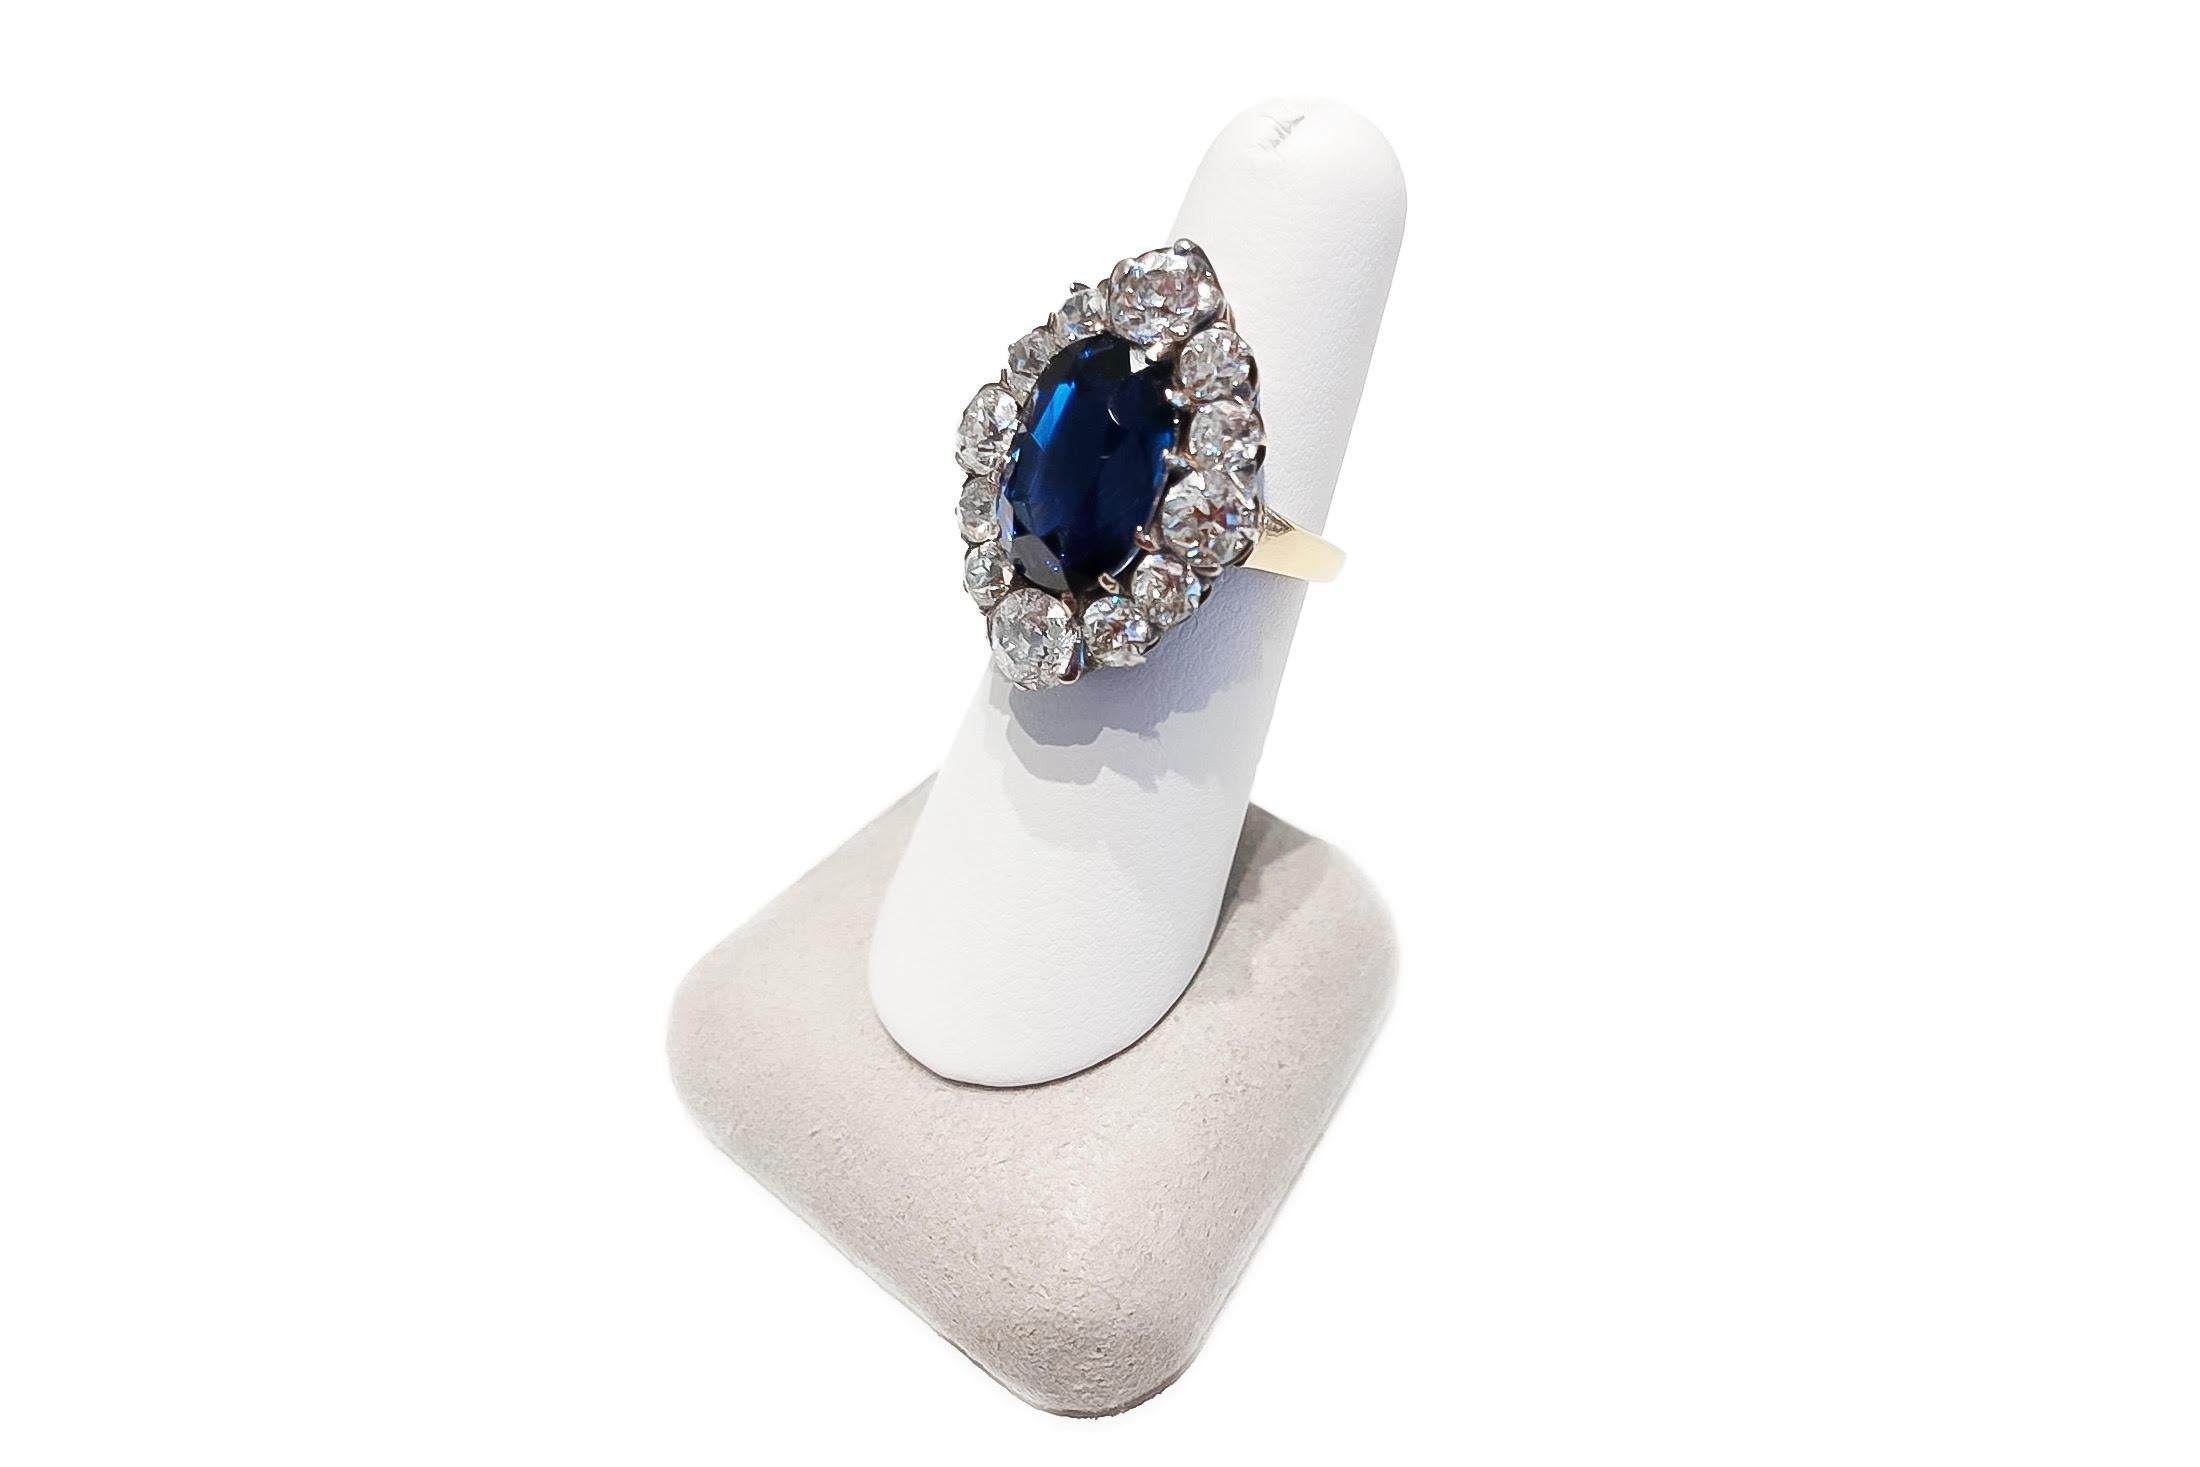 Oval Cut Blue Sapphire weighing 10.04 carats, set in 18K Yellow and White Gold Ring accented with twelve round old-cut diamonds. Sapphire is from Sri Lanka, Ceylon, no Heat.
AGL# CS1073487 